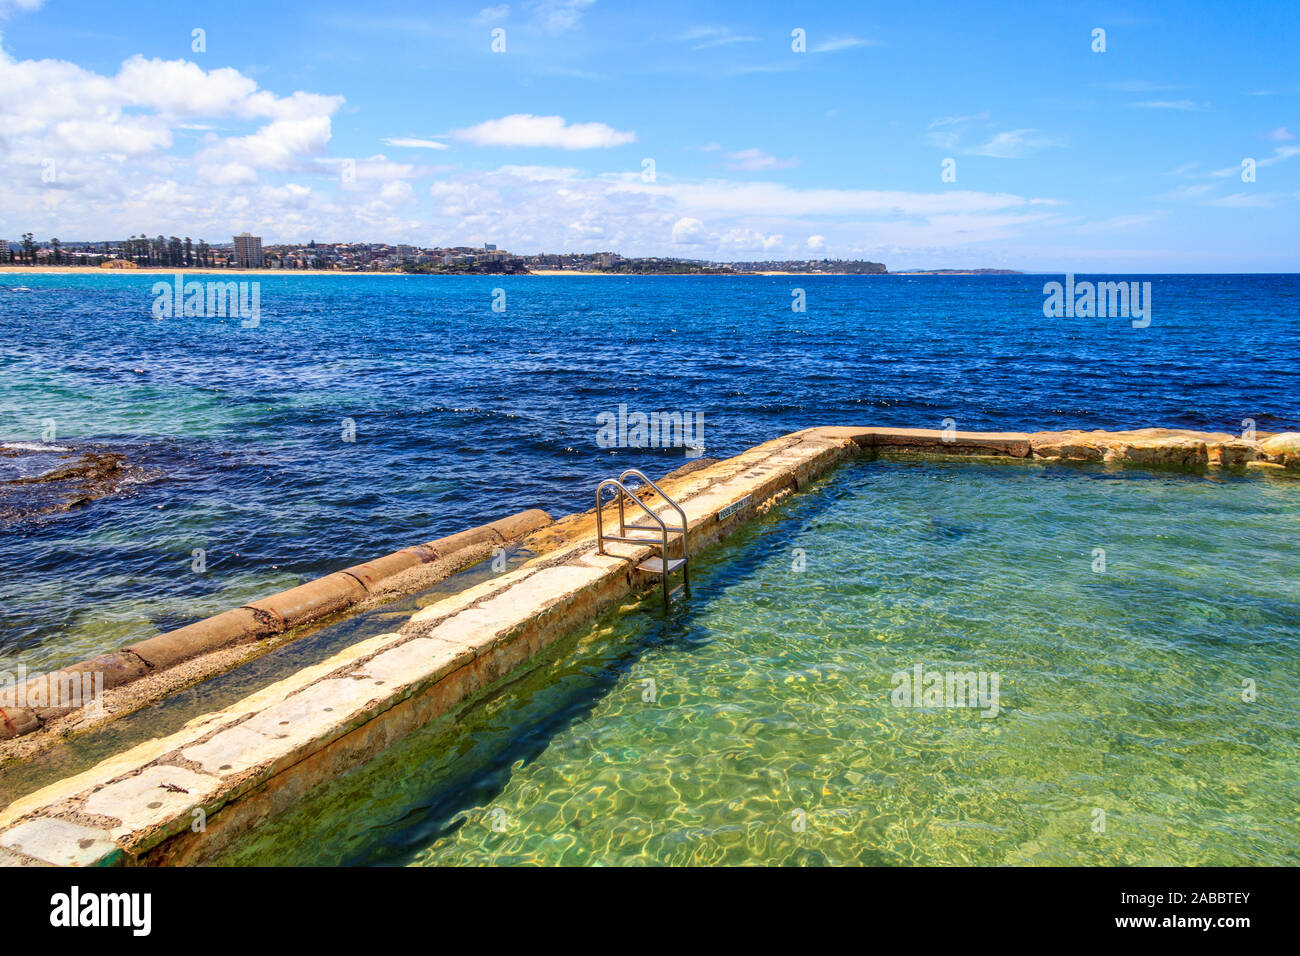 Manly salt water swimming pool, Manly, SYdney, Australia Stock Photo